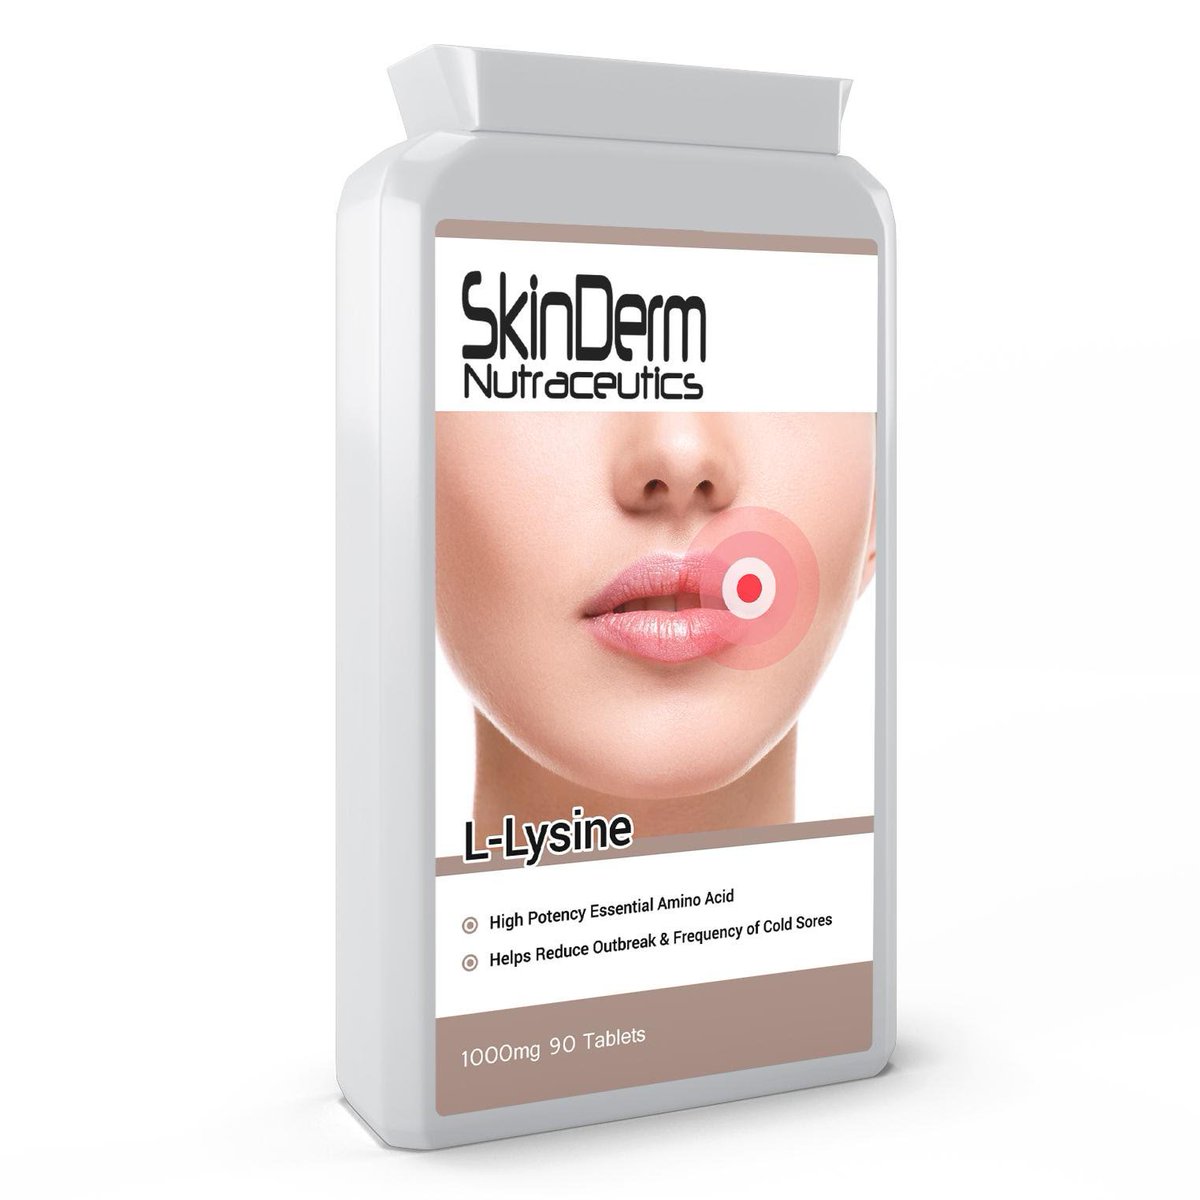 SkinDerm Ntraceutics #L_Lysine tablets provide a high strength daily #Lysine #supplement to help maintain #healthydietary balance of this essential #aminoacid. Shop now at skinderm.co.uk OR amzn.to/2Pnz0wQ #Skin #Derm #Nutraceuticals #Lysinesupplement #healthy